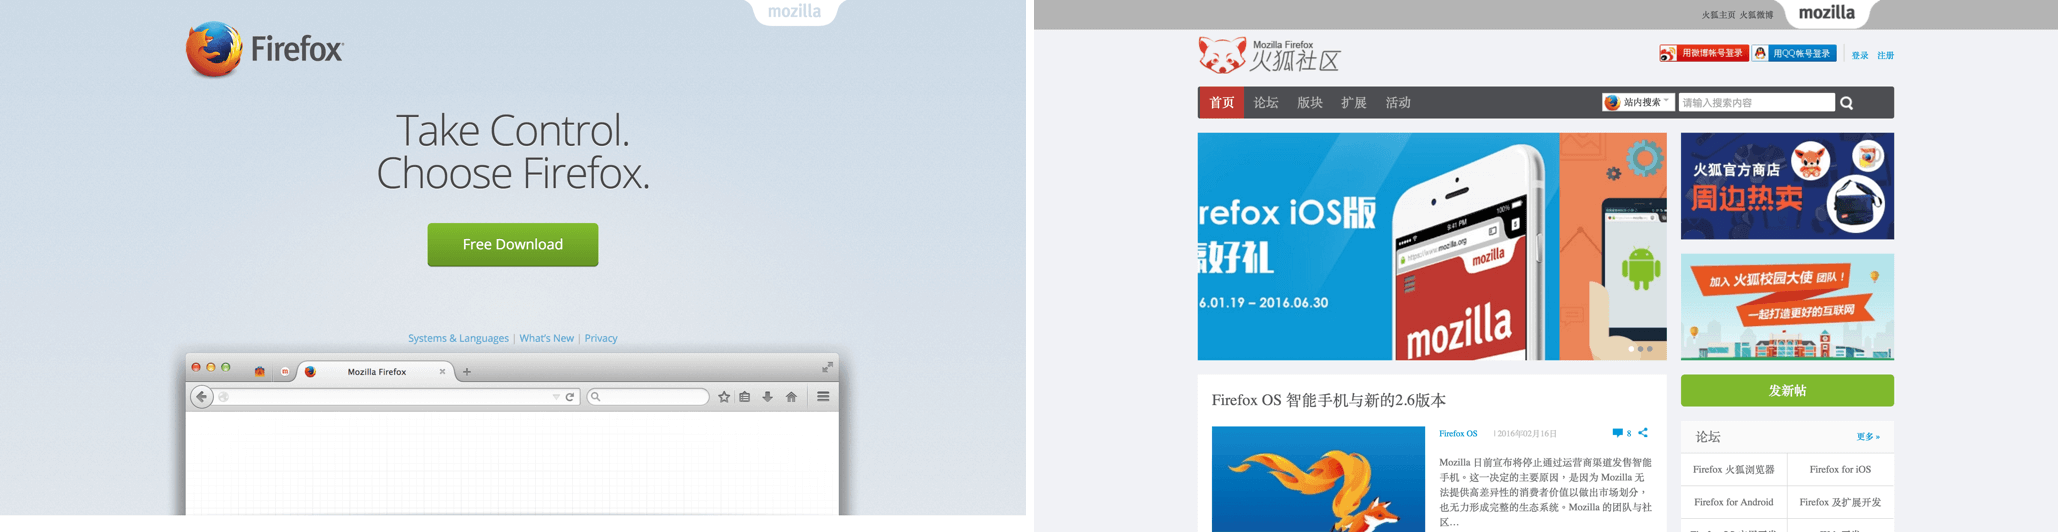 decluttered and cluttered versions of mozilla firefox login page for USA and China respectively, using theme colours orange blue and white besides the logo of a fox wrapped around a globe